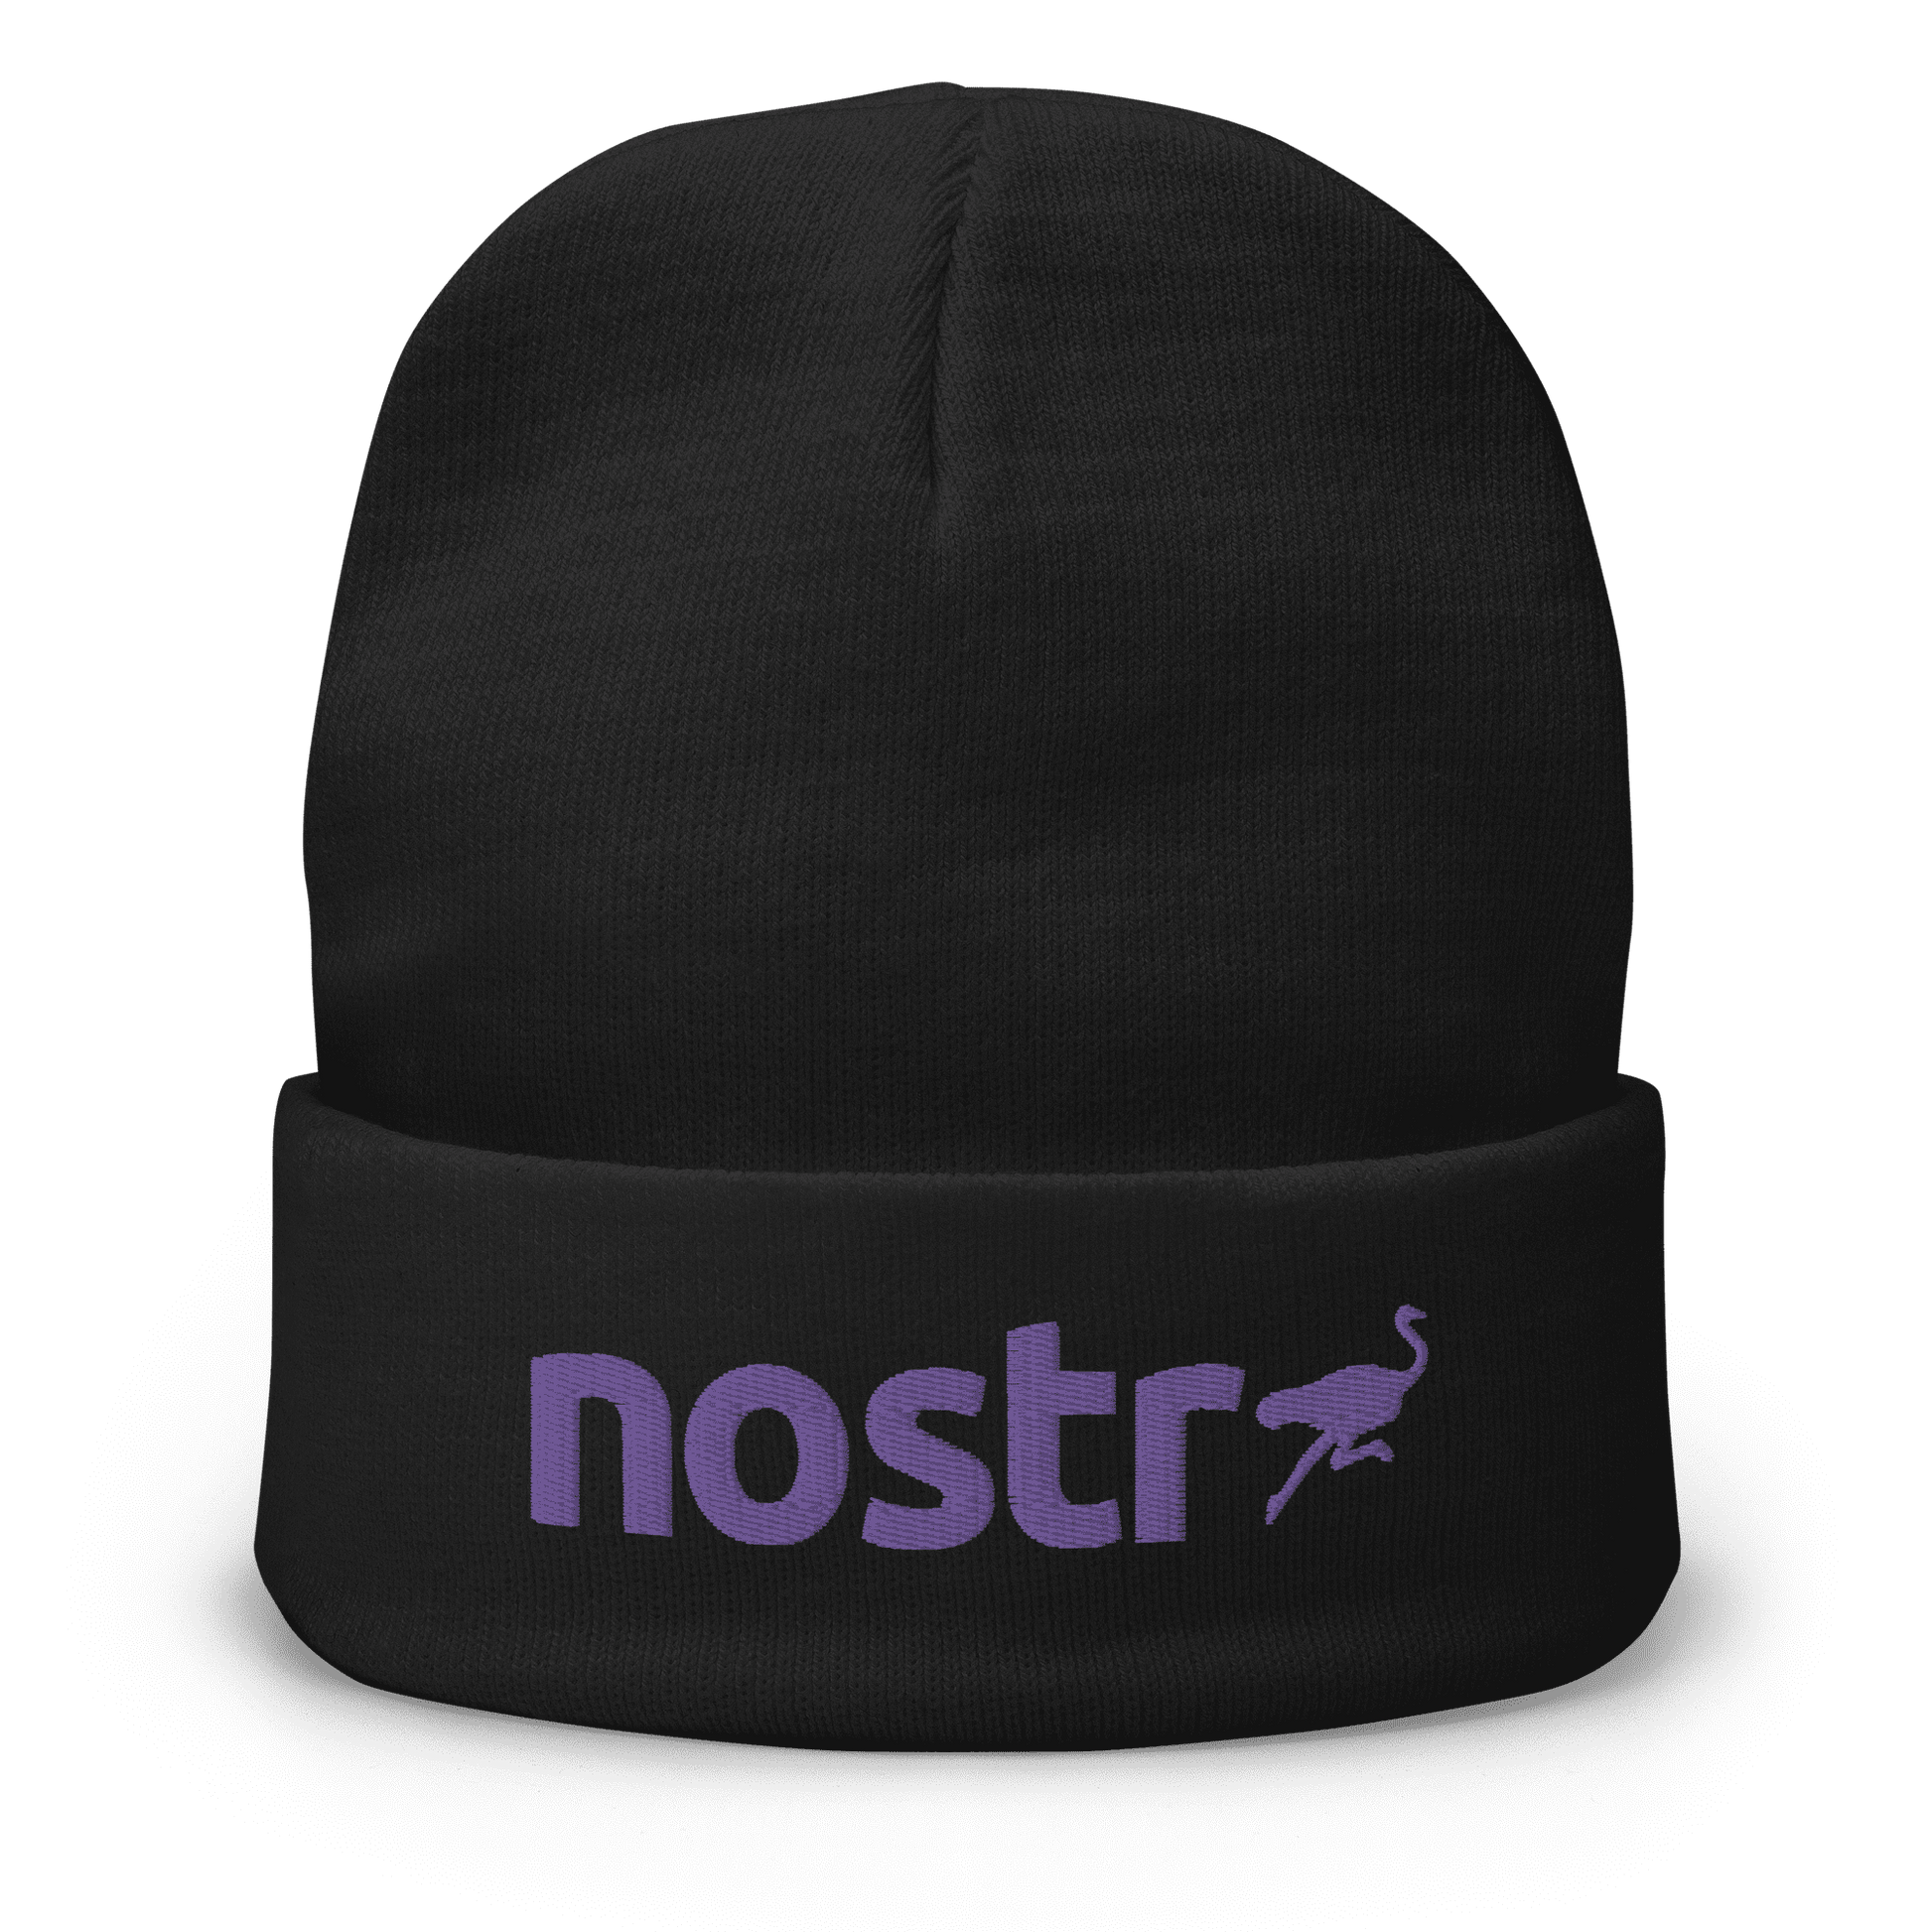 Front view of a black nostr beanie.